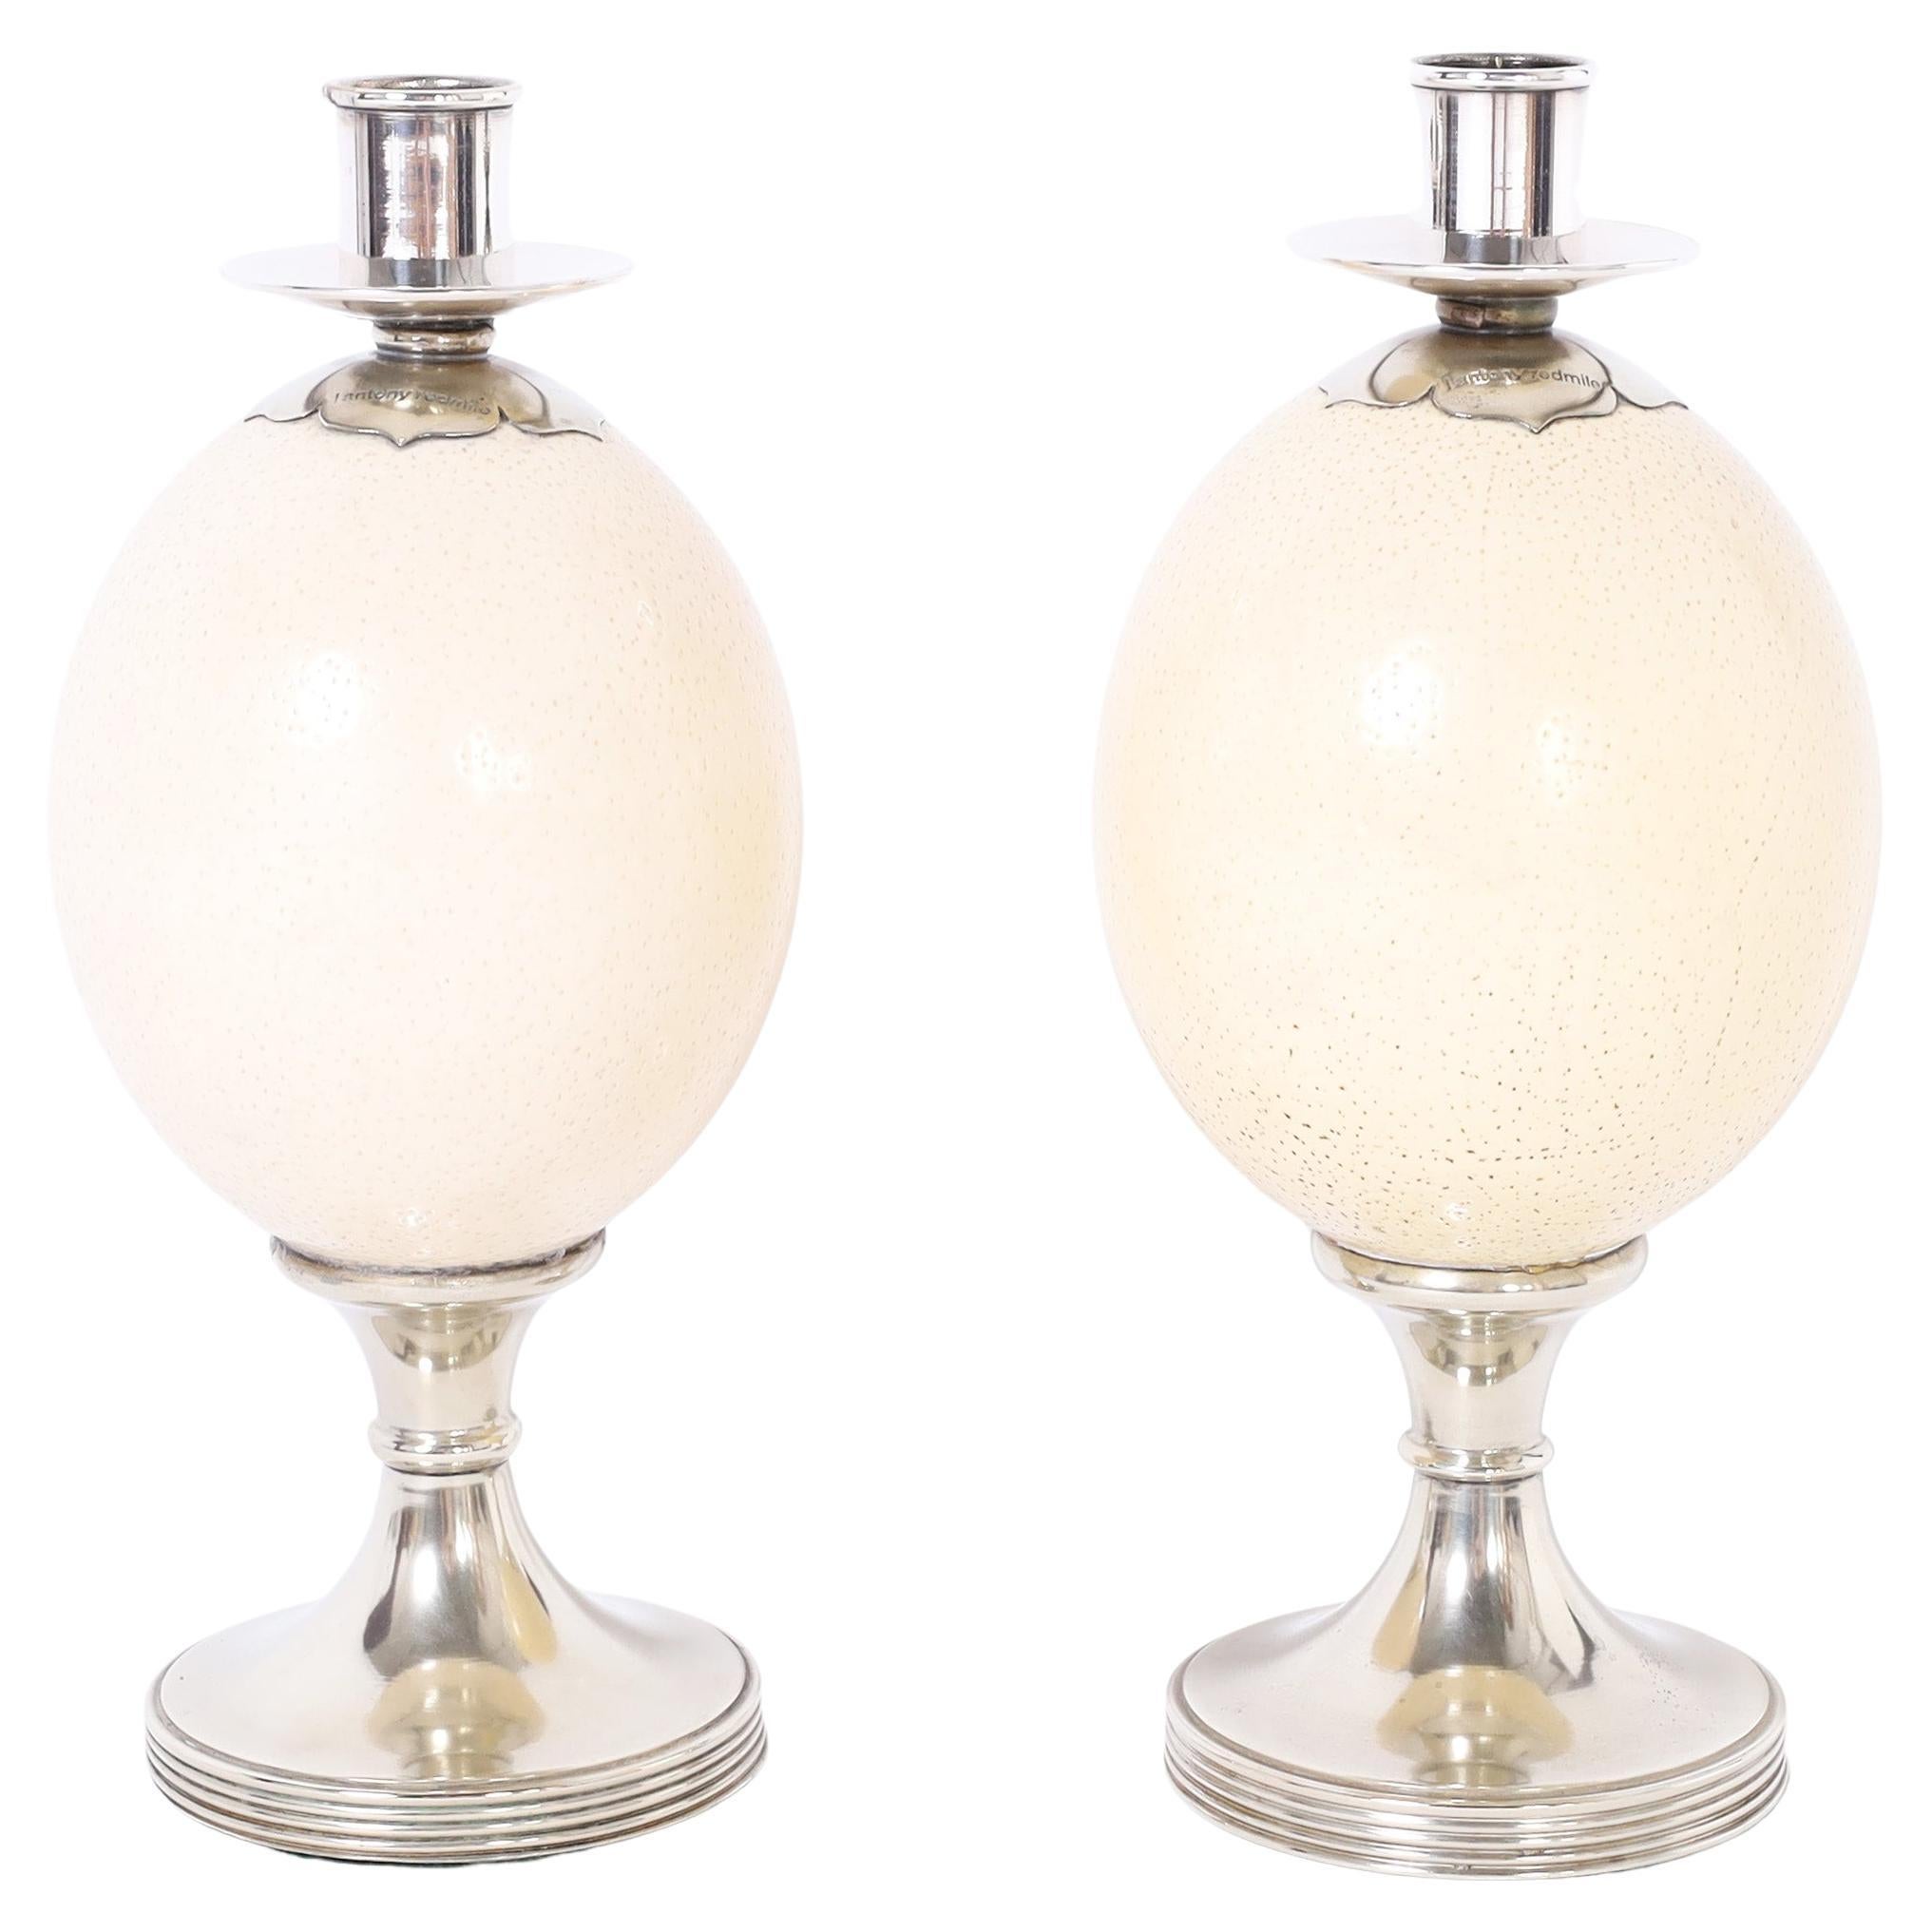  Antony Redmile Pair of Ostrich Egg Candlesticks